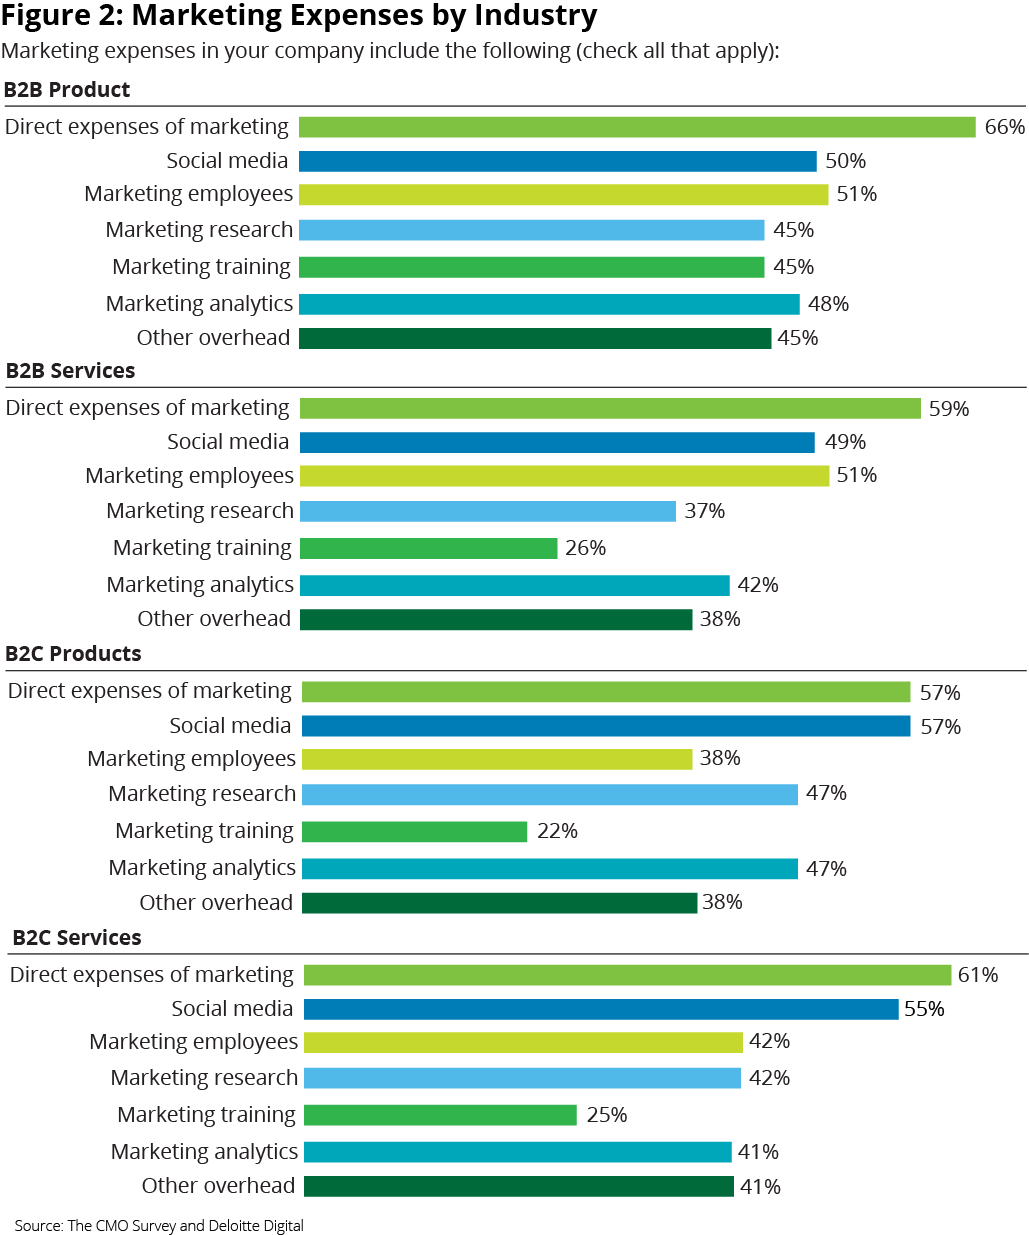 Marketing expenses by industry